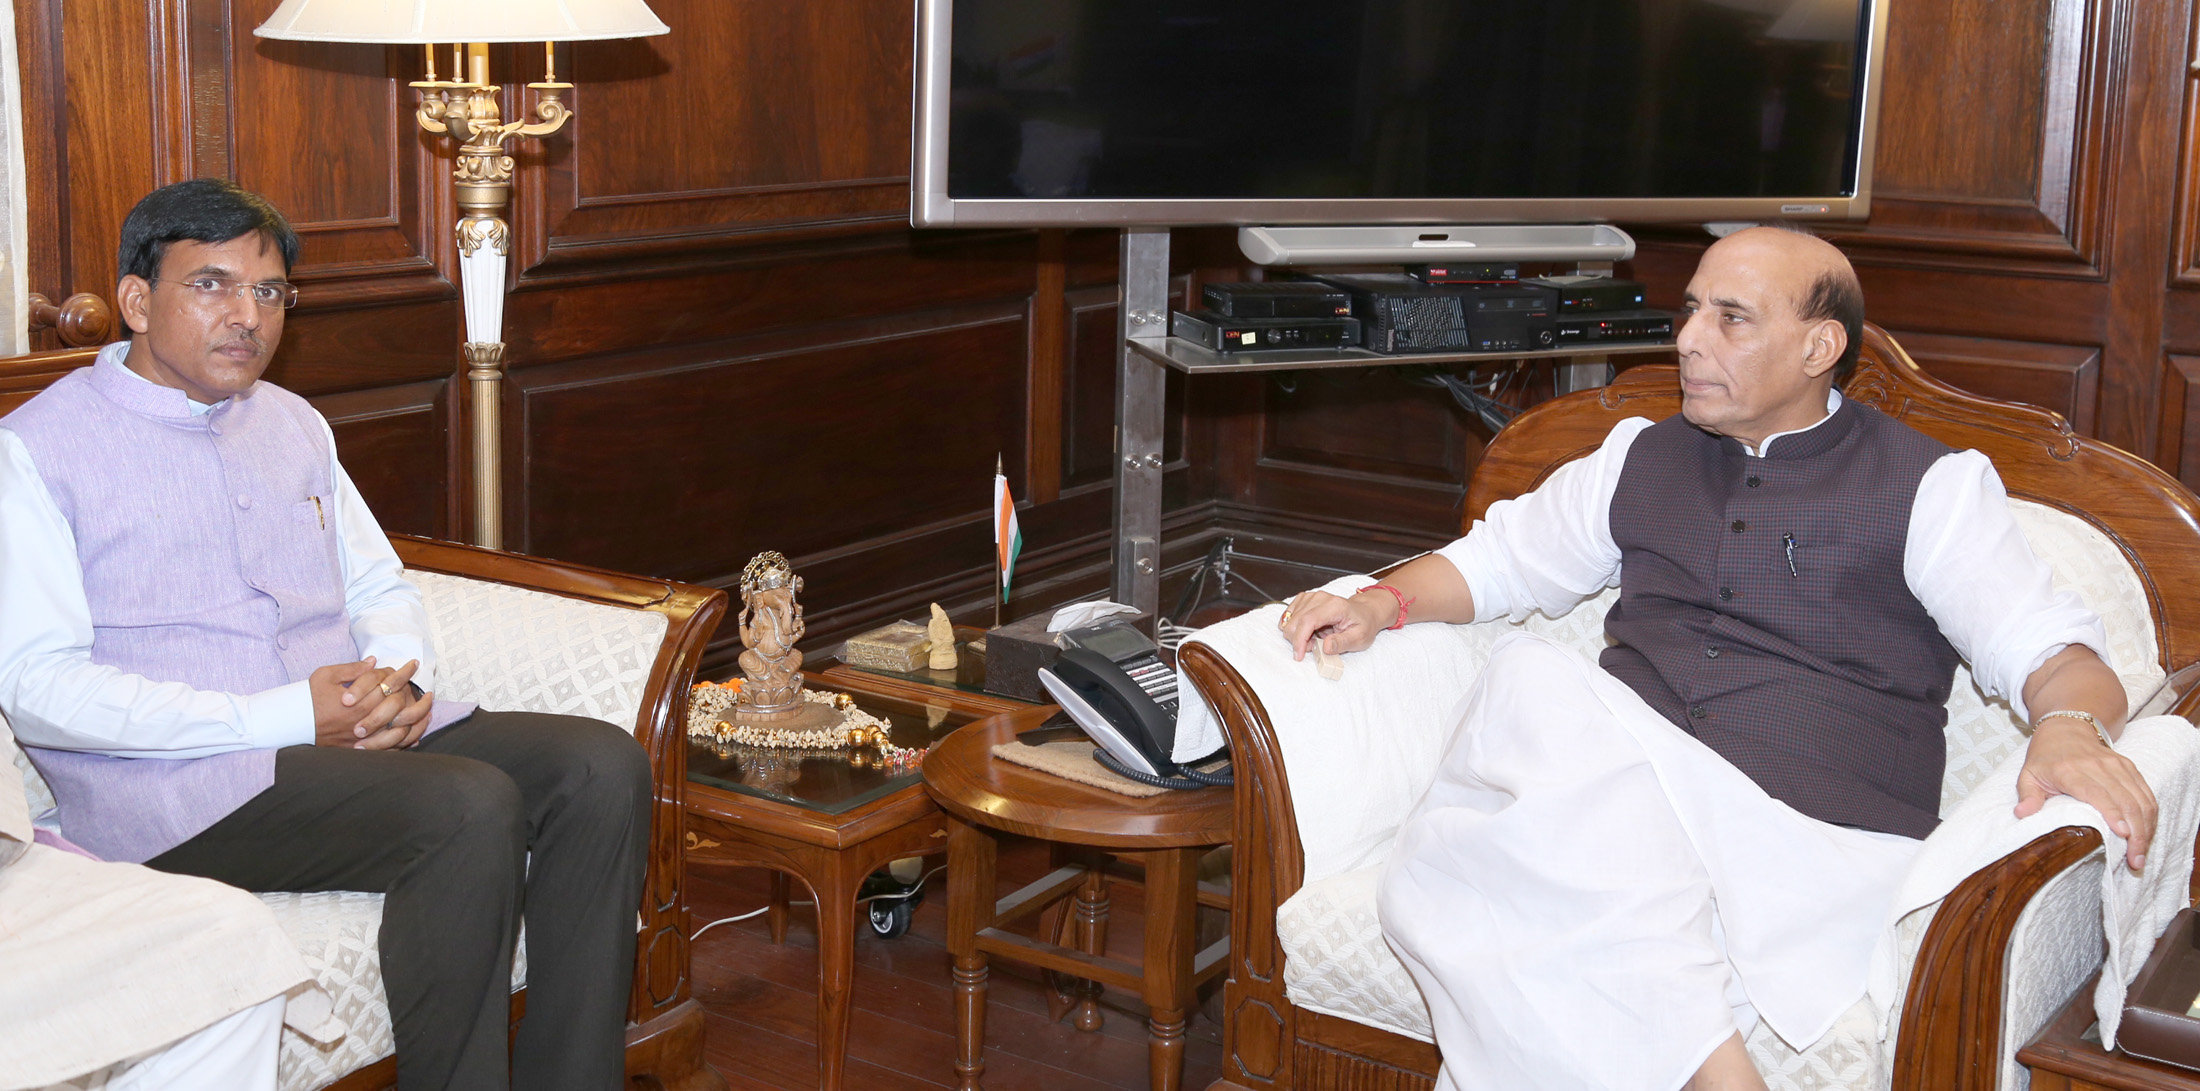 The Minister of State for Road Transport & Highways, Shipping and Chemicals & Fertilizers, Shri Mansukh L. Mandaviya calling on the Union Home Minister, Shri Rajnath Singh, in New Delhi on July 12, 2016.